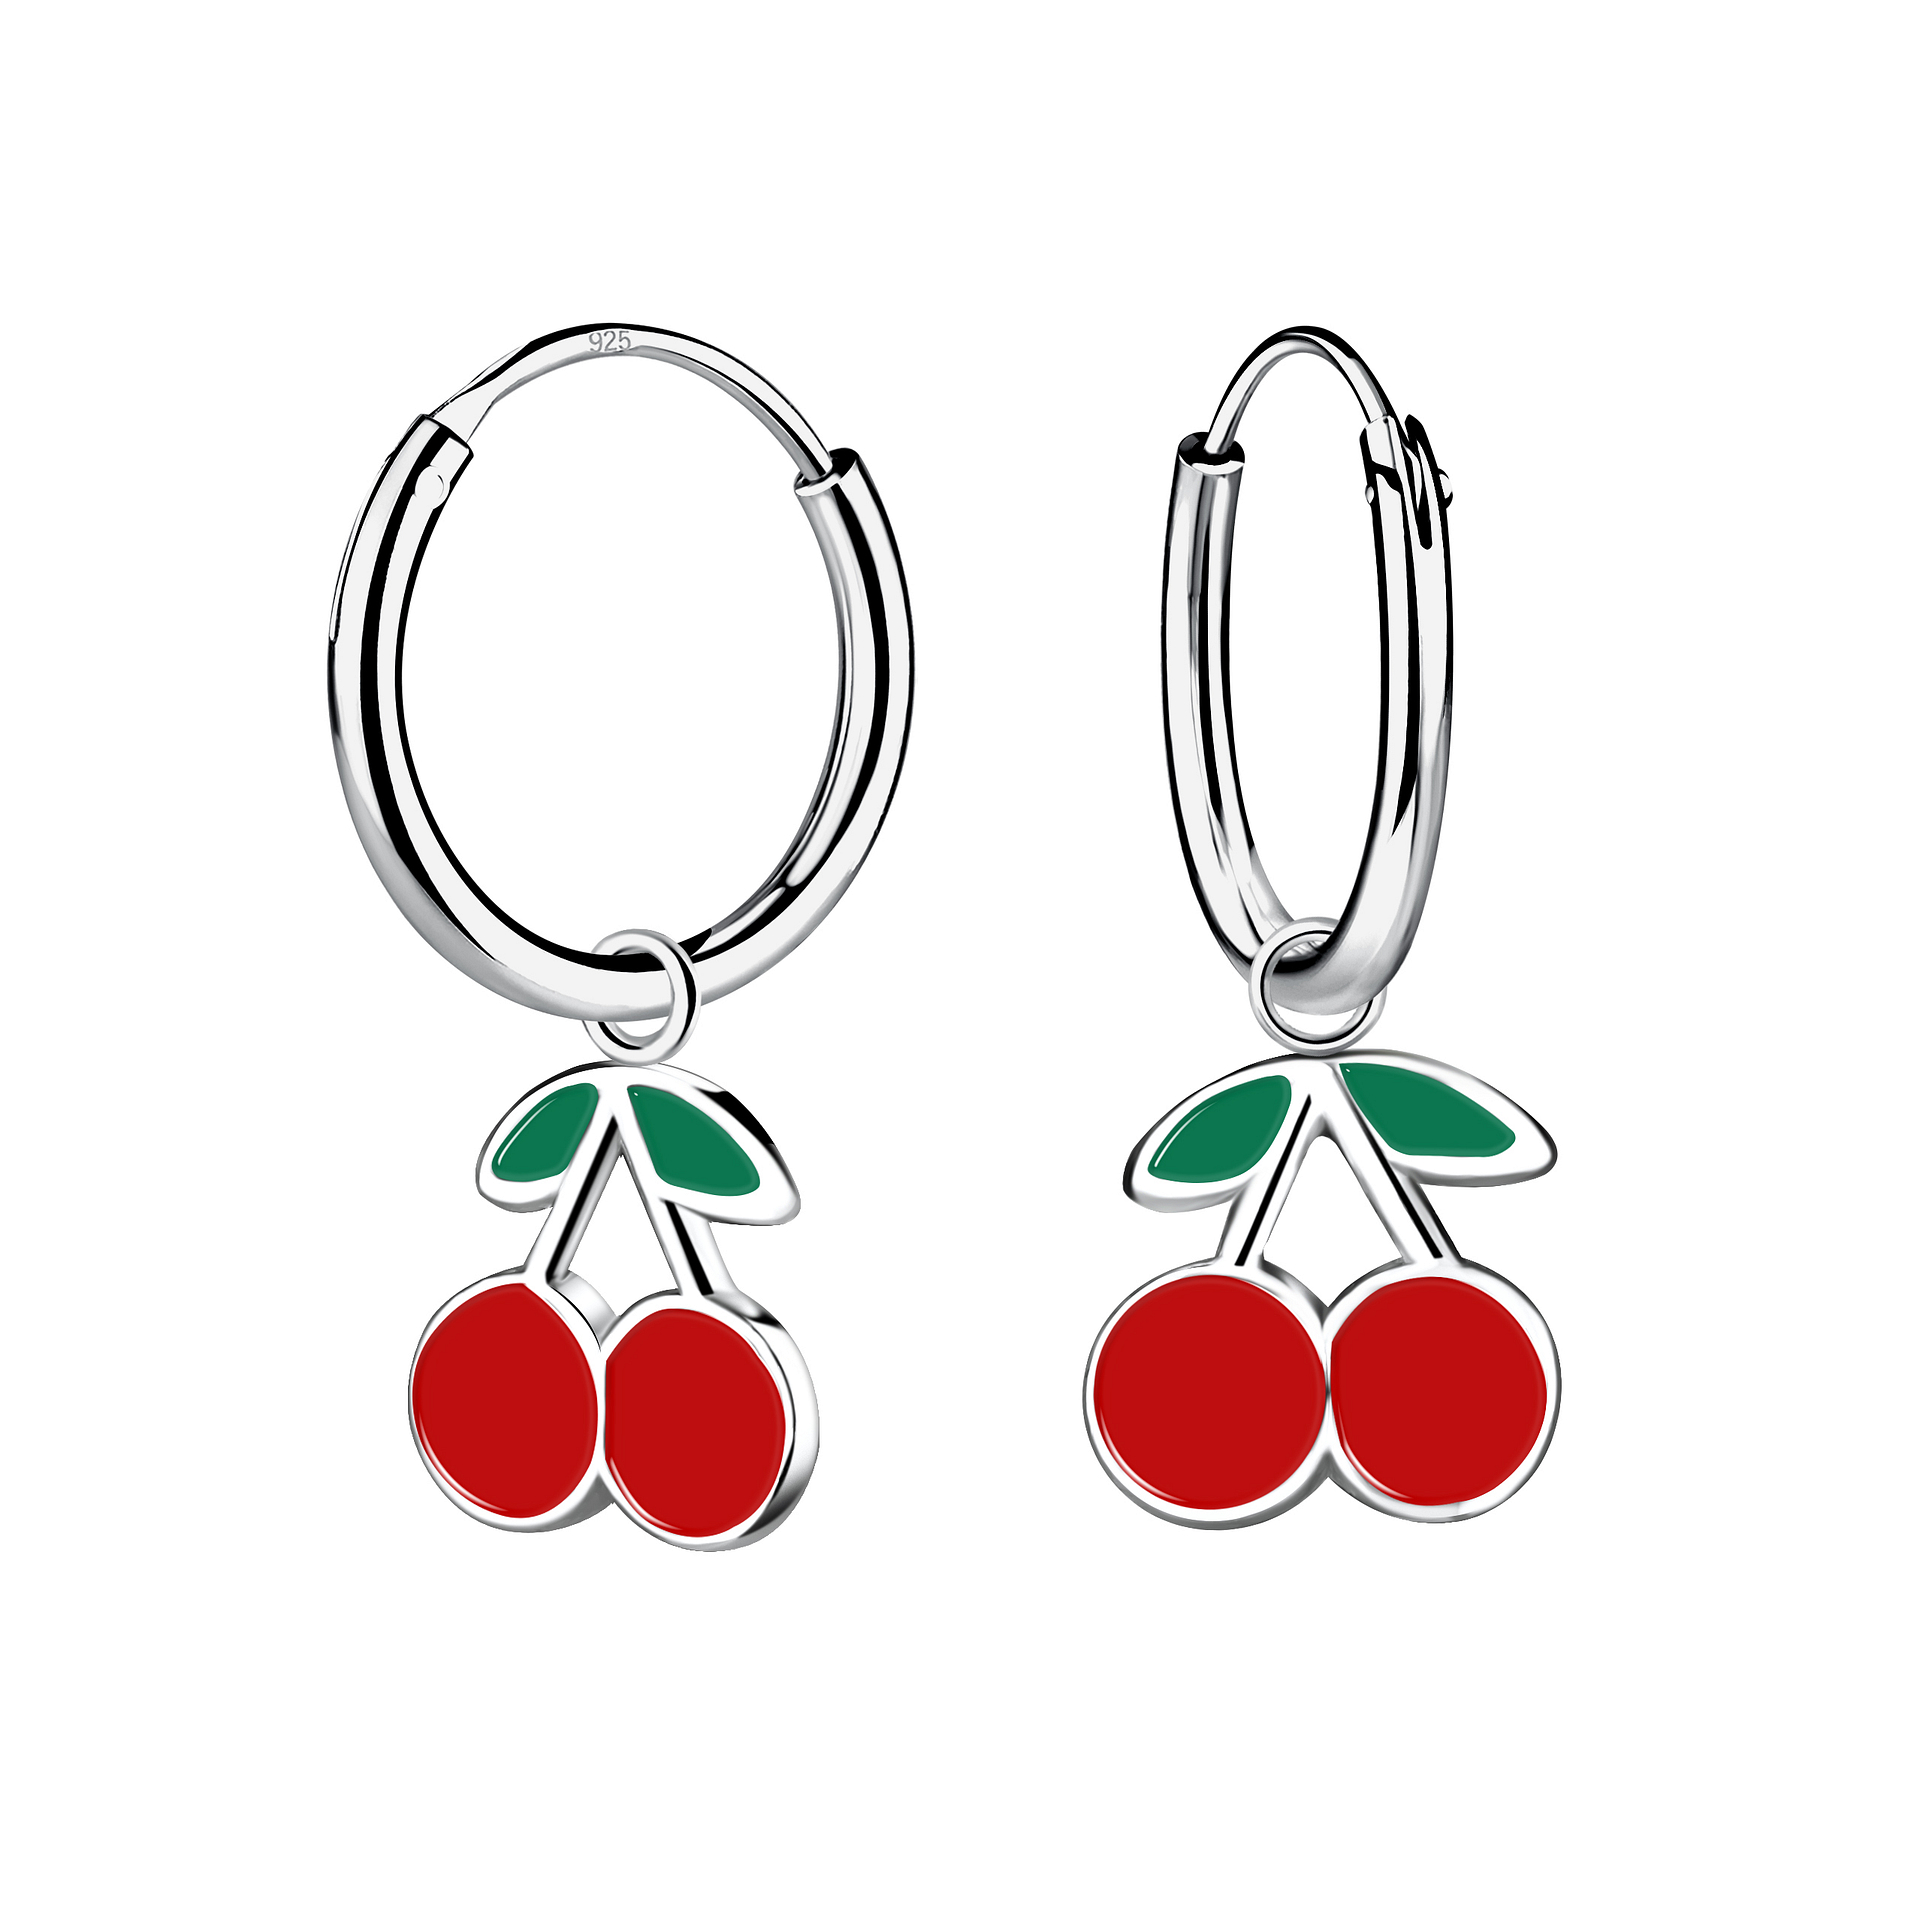 Pocket-Friendly Wholesale plastic earring hooks For All Occasions